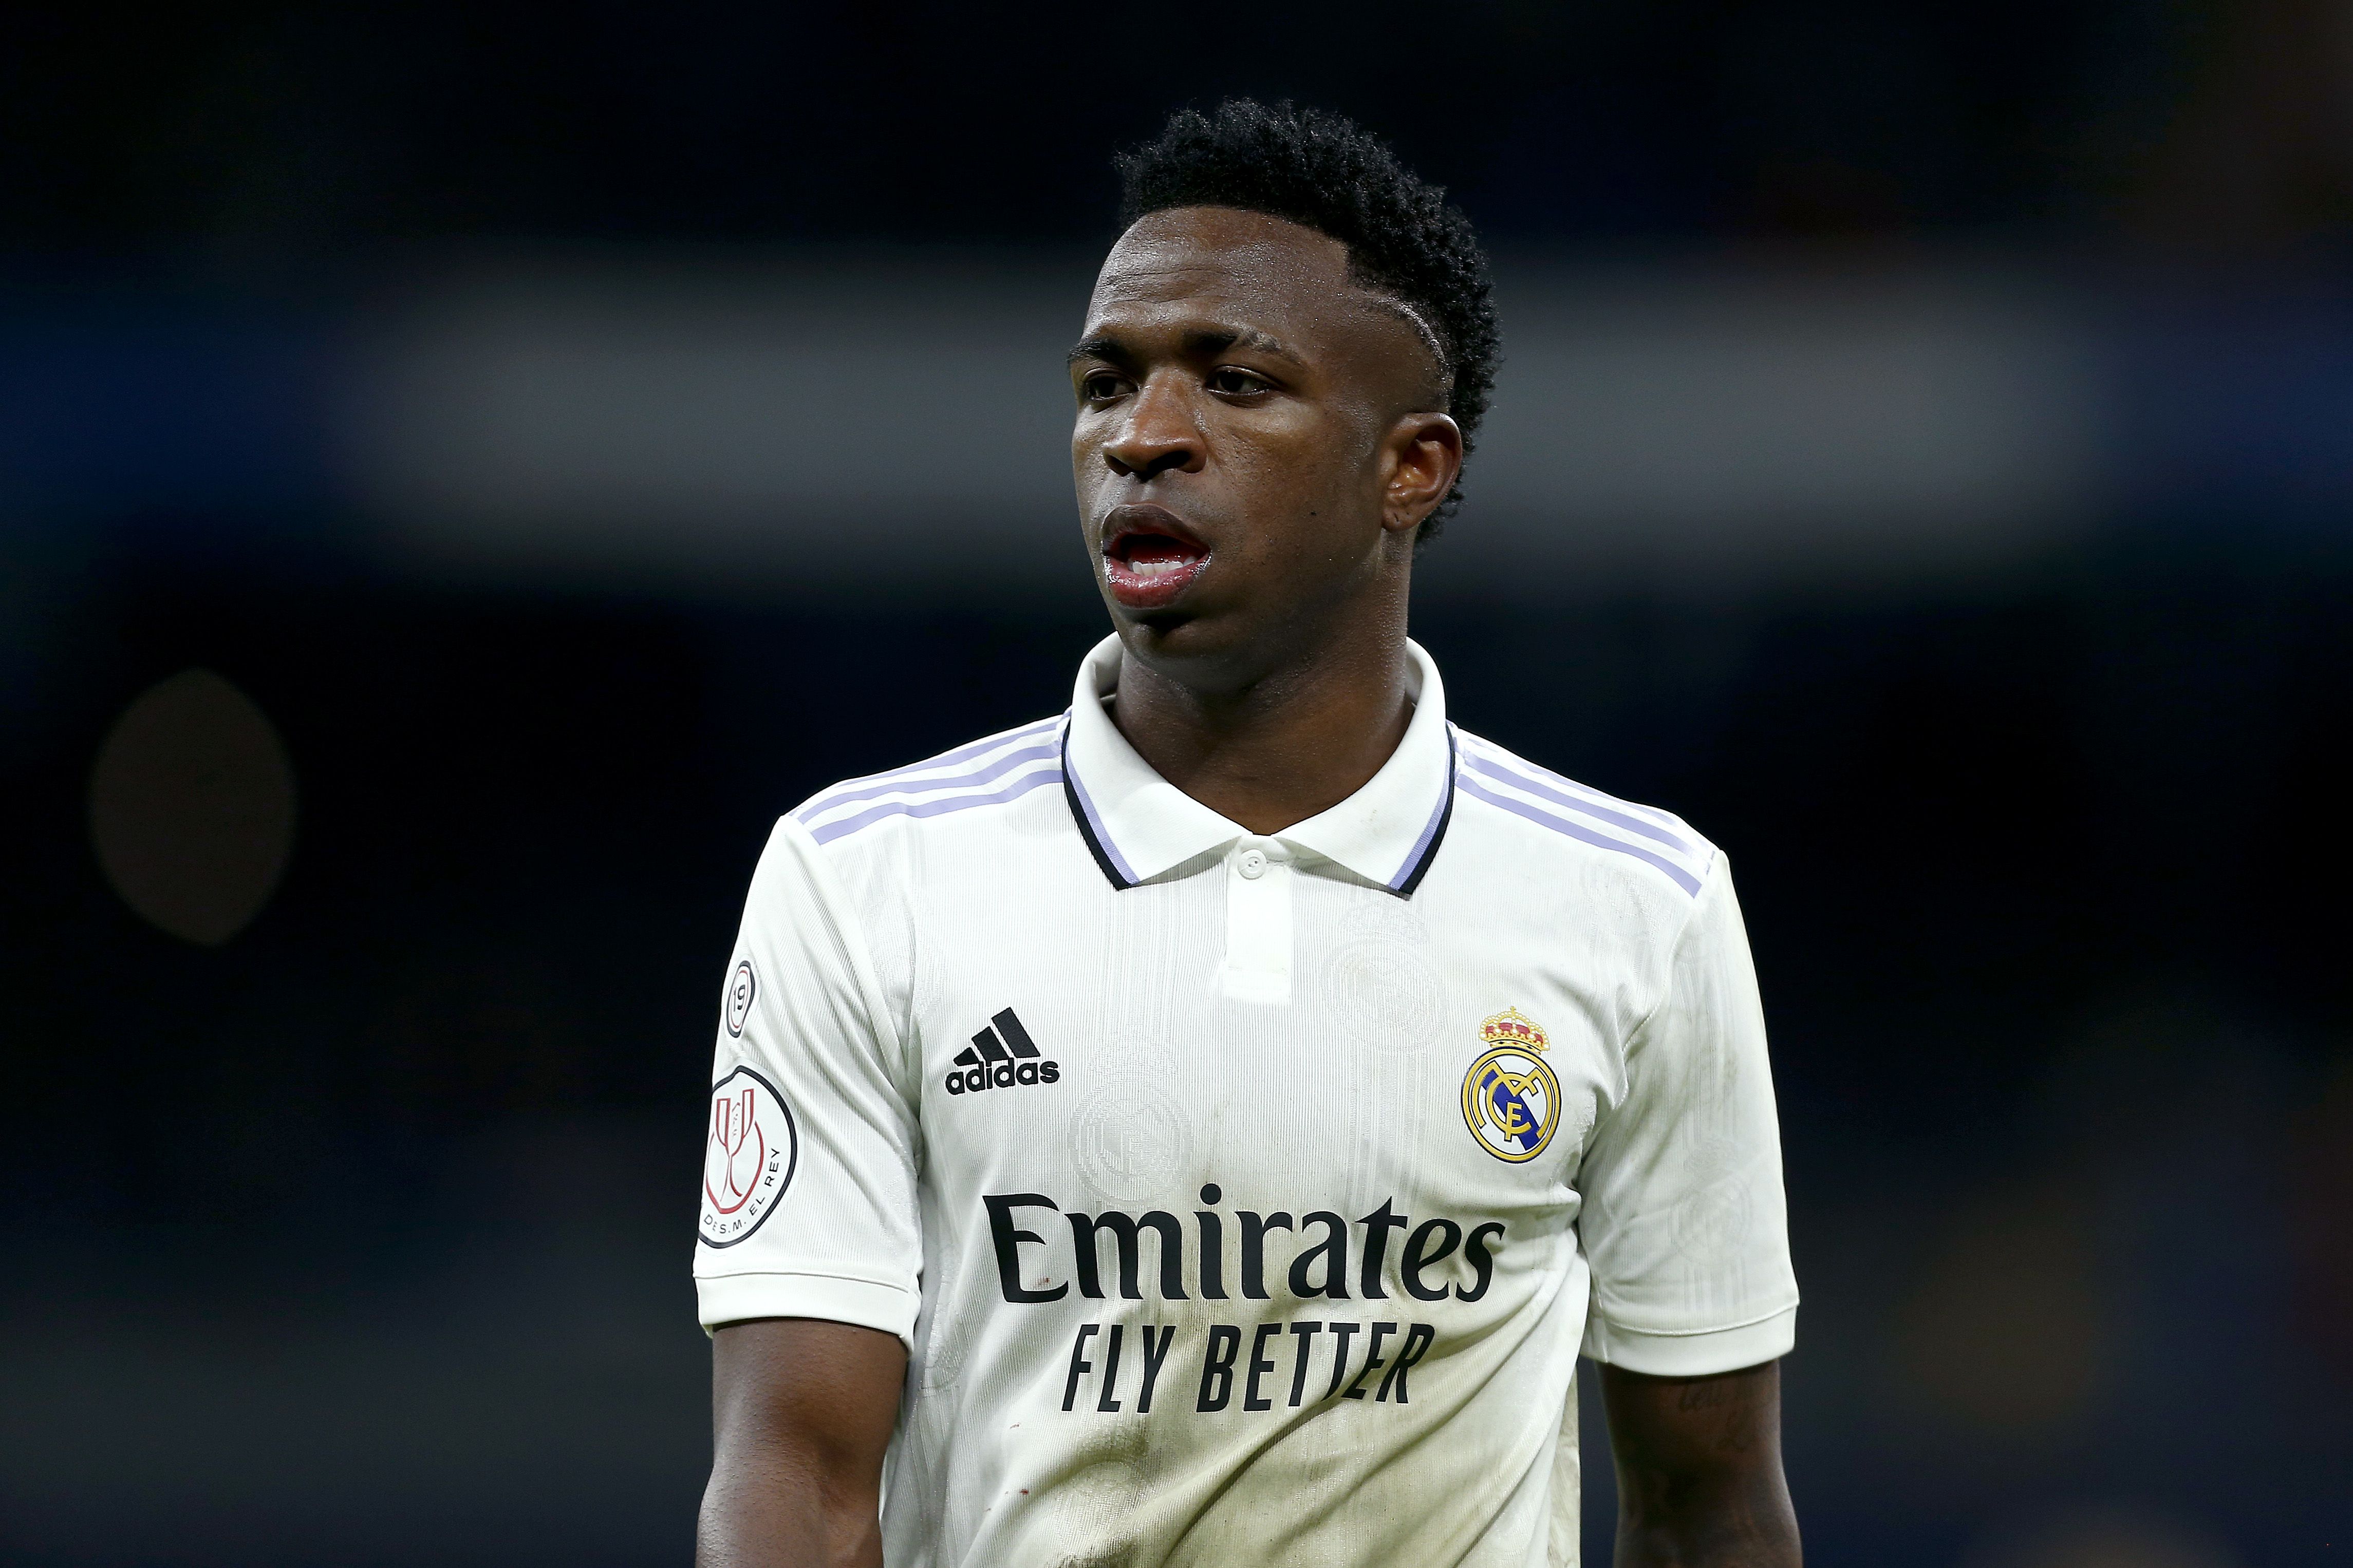 La Liga: Vinicius Jr receives support after racism row in Real